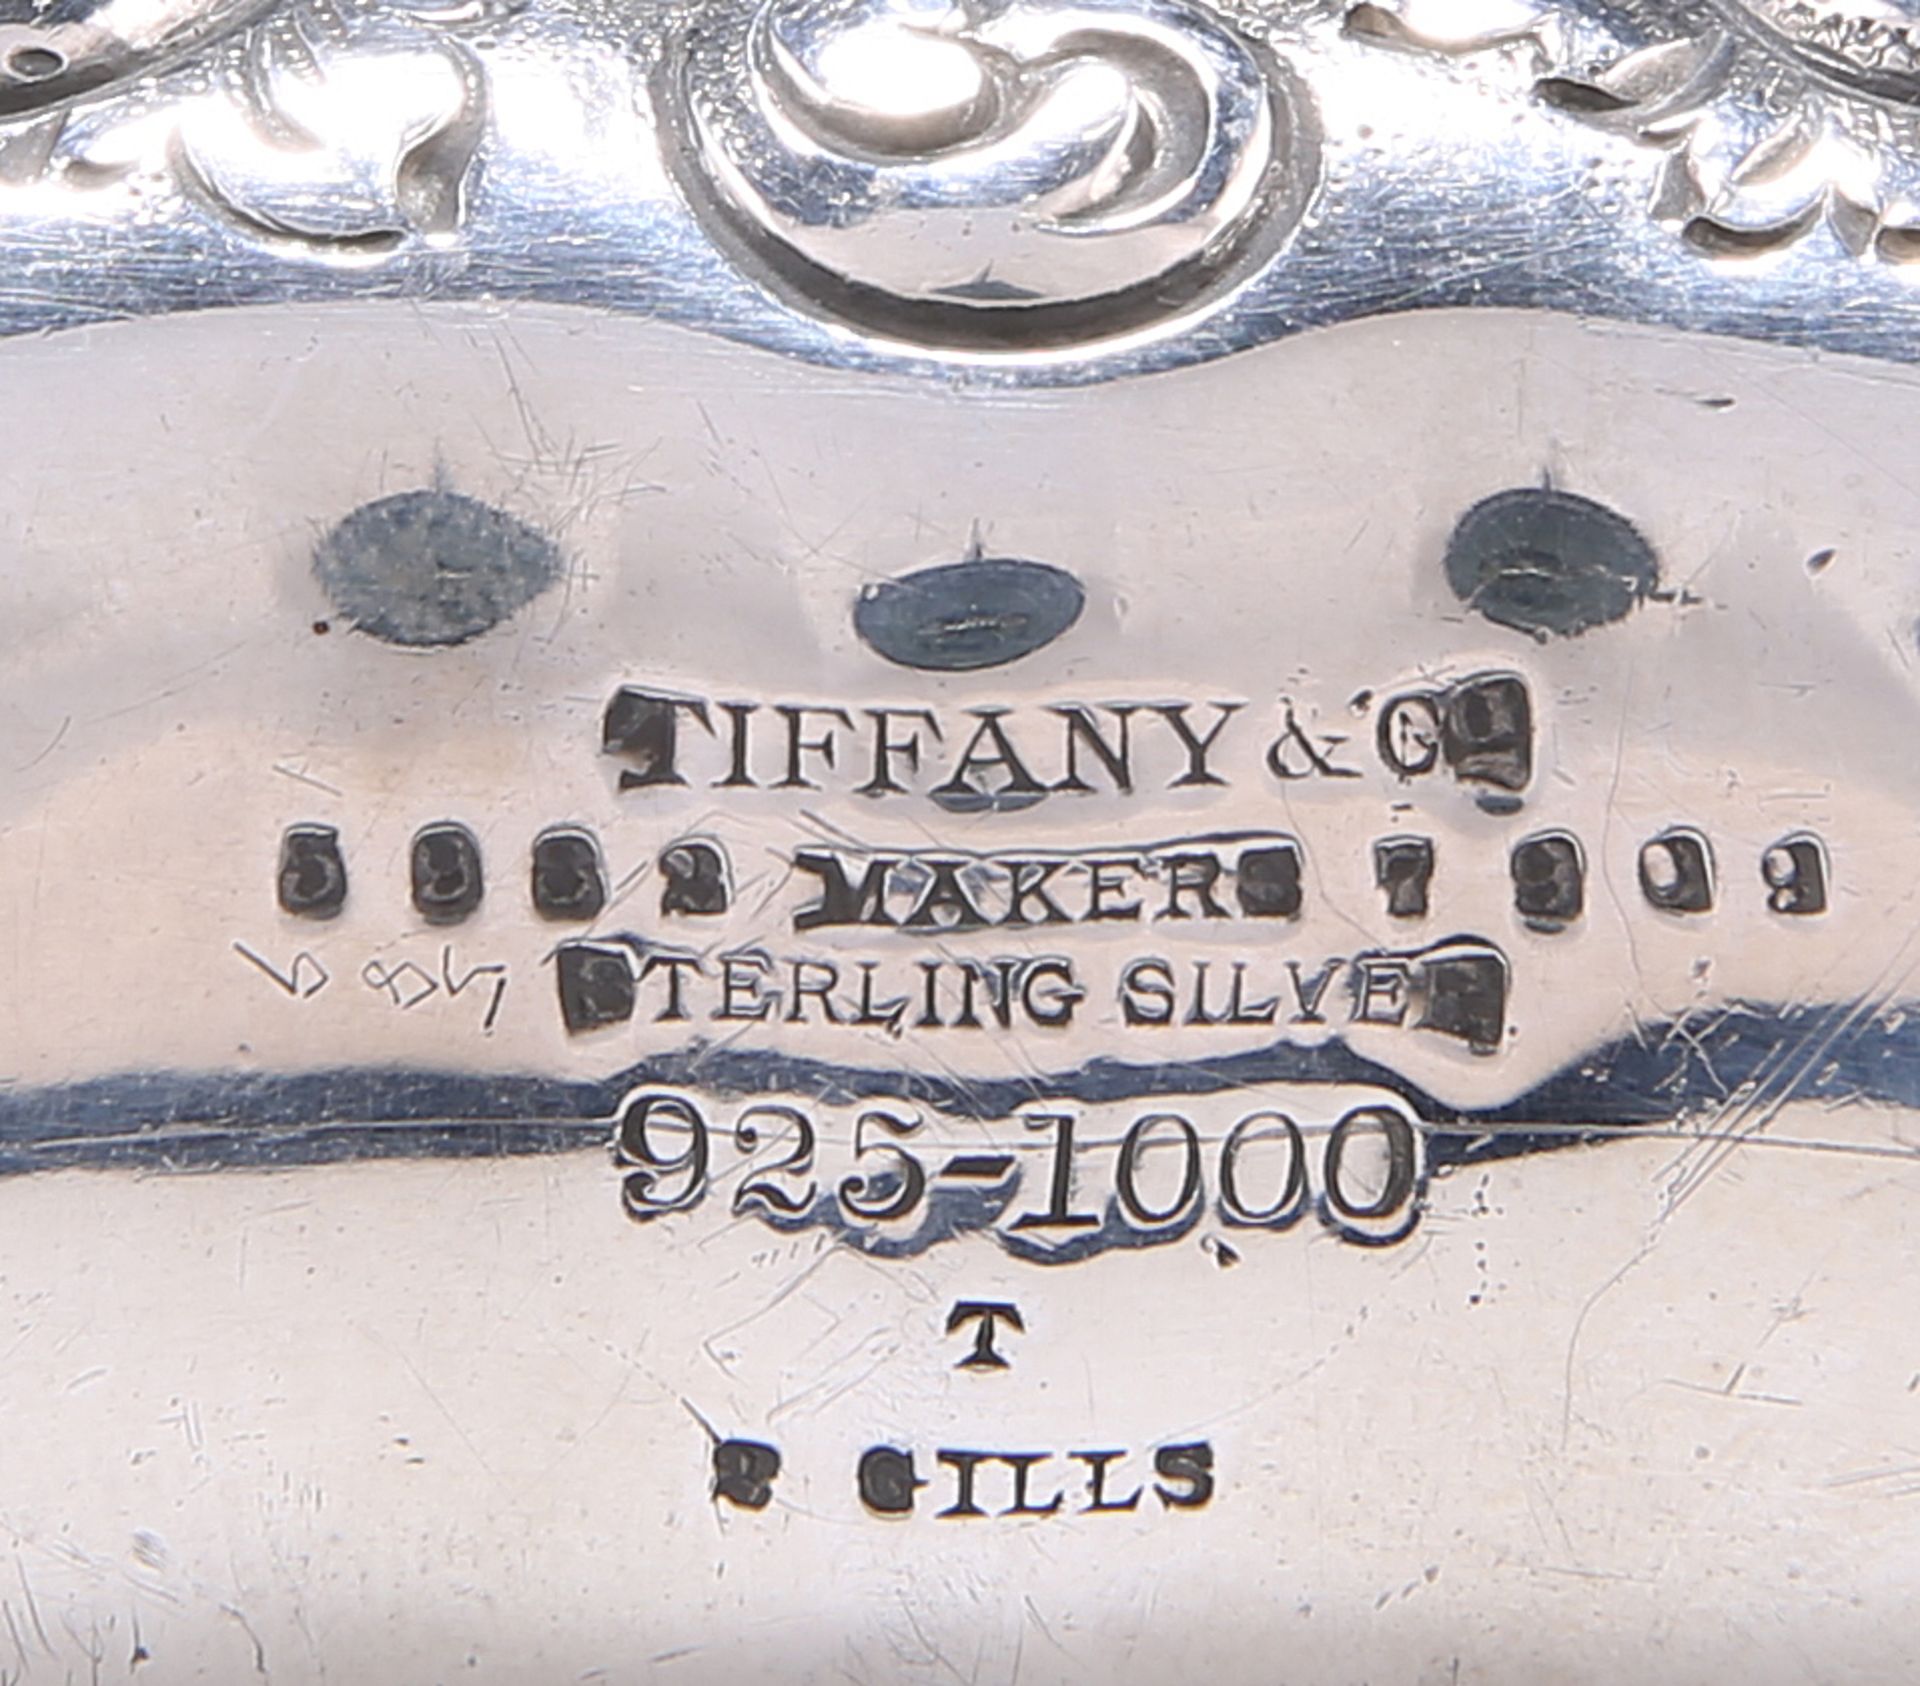 TIFFANY & CO., AN AMERICAN STERLING SILVER FLASK - Image 3 of 3